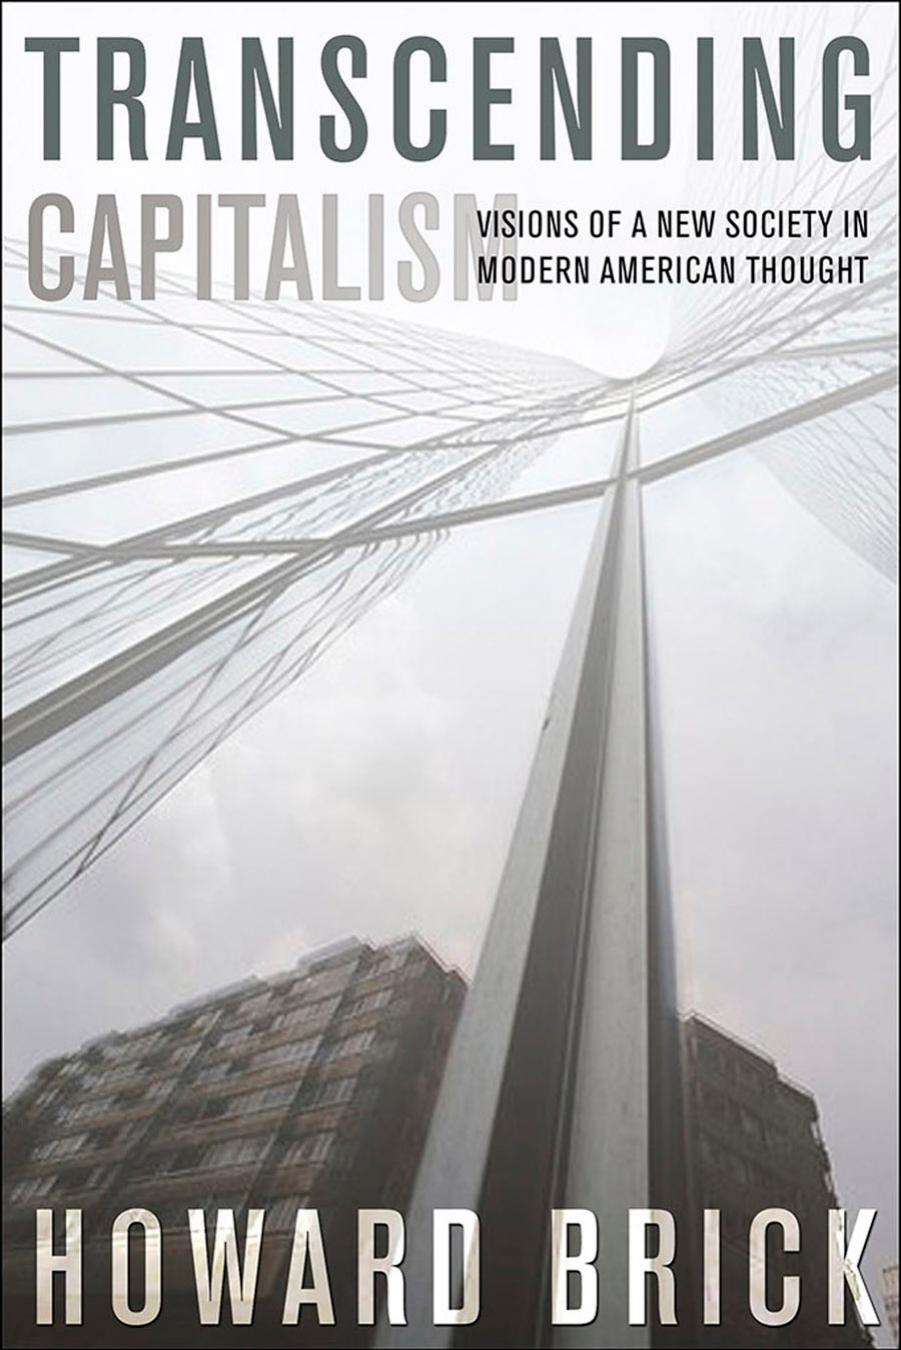 Transcending Capitalism: Visions of a New Society in Modern American Thought by by Howard Brick